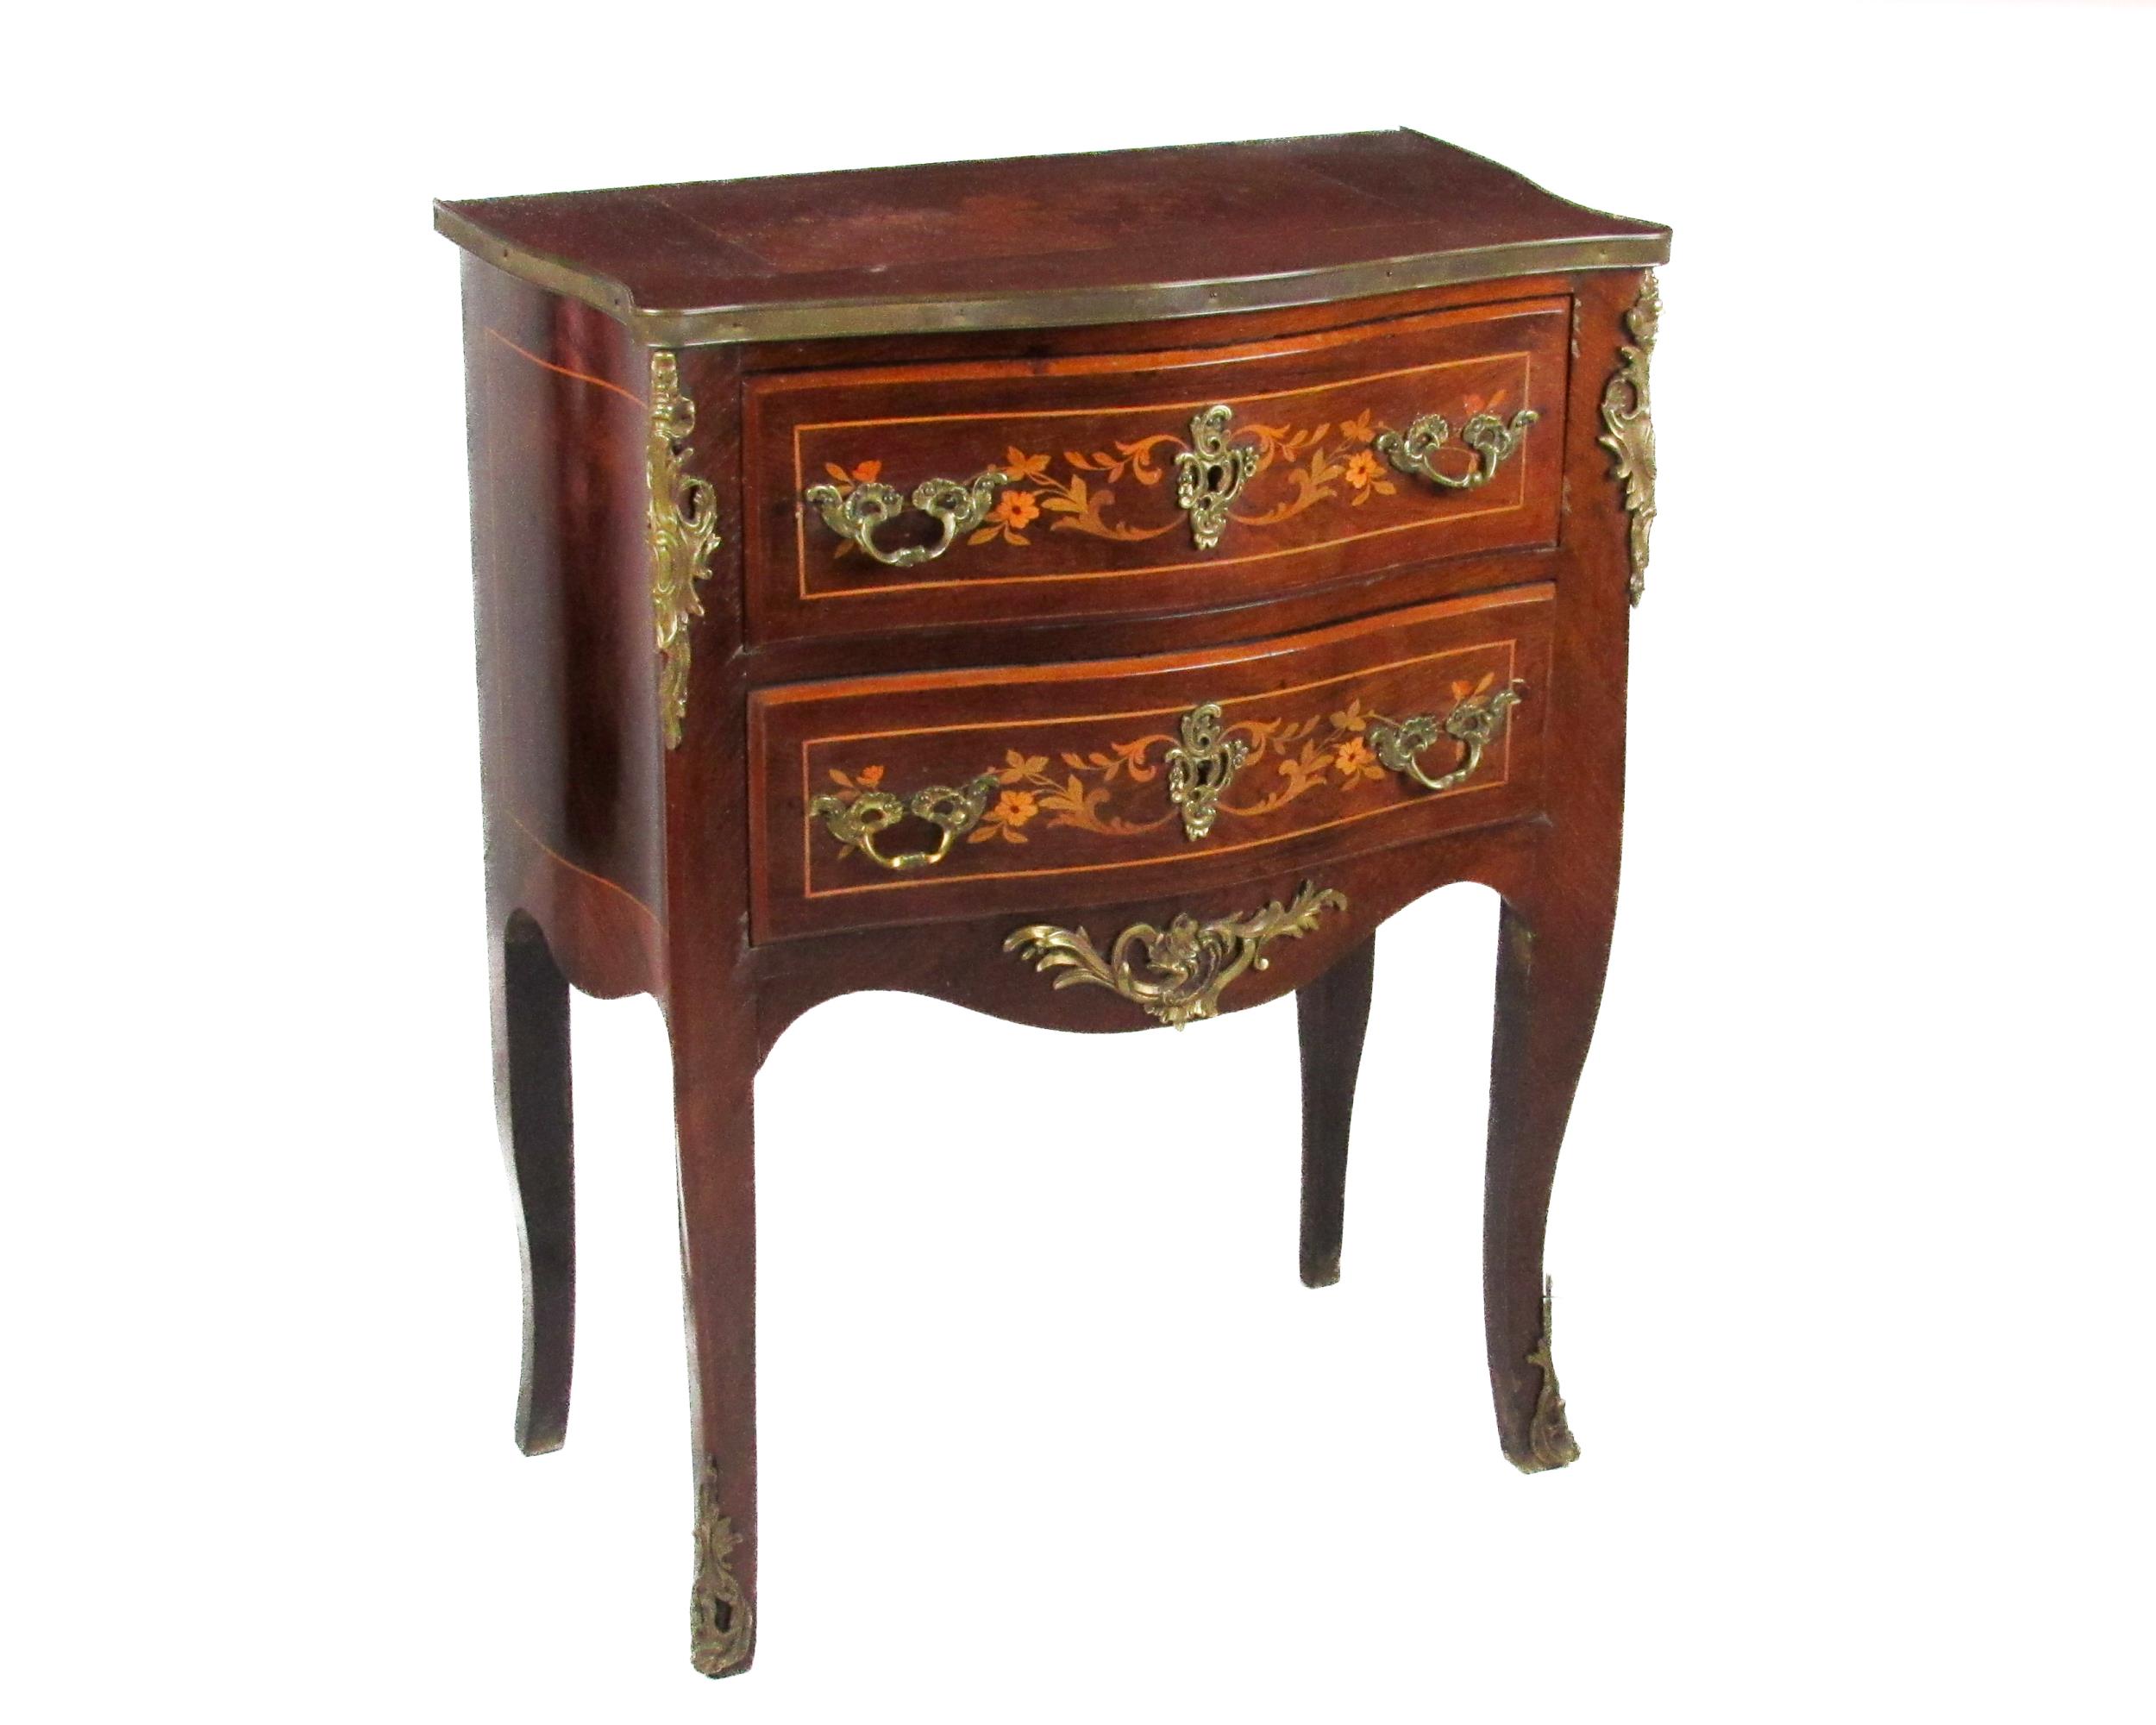 A French Louis XVI style bombe shaped Commode, of small proportions with floral marquetry top